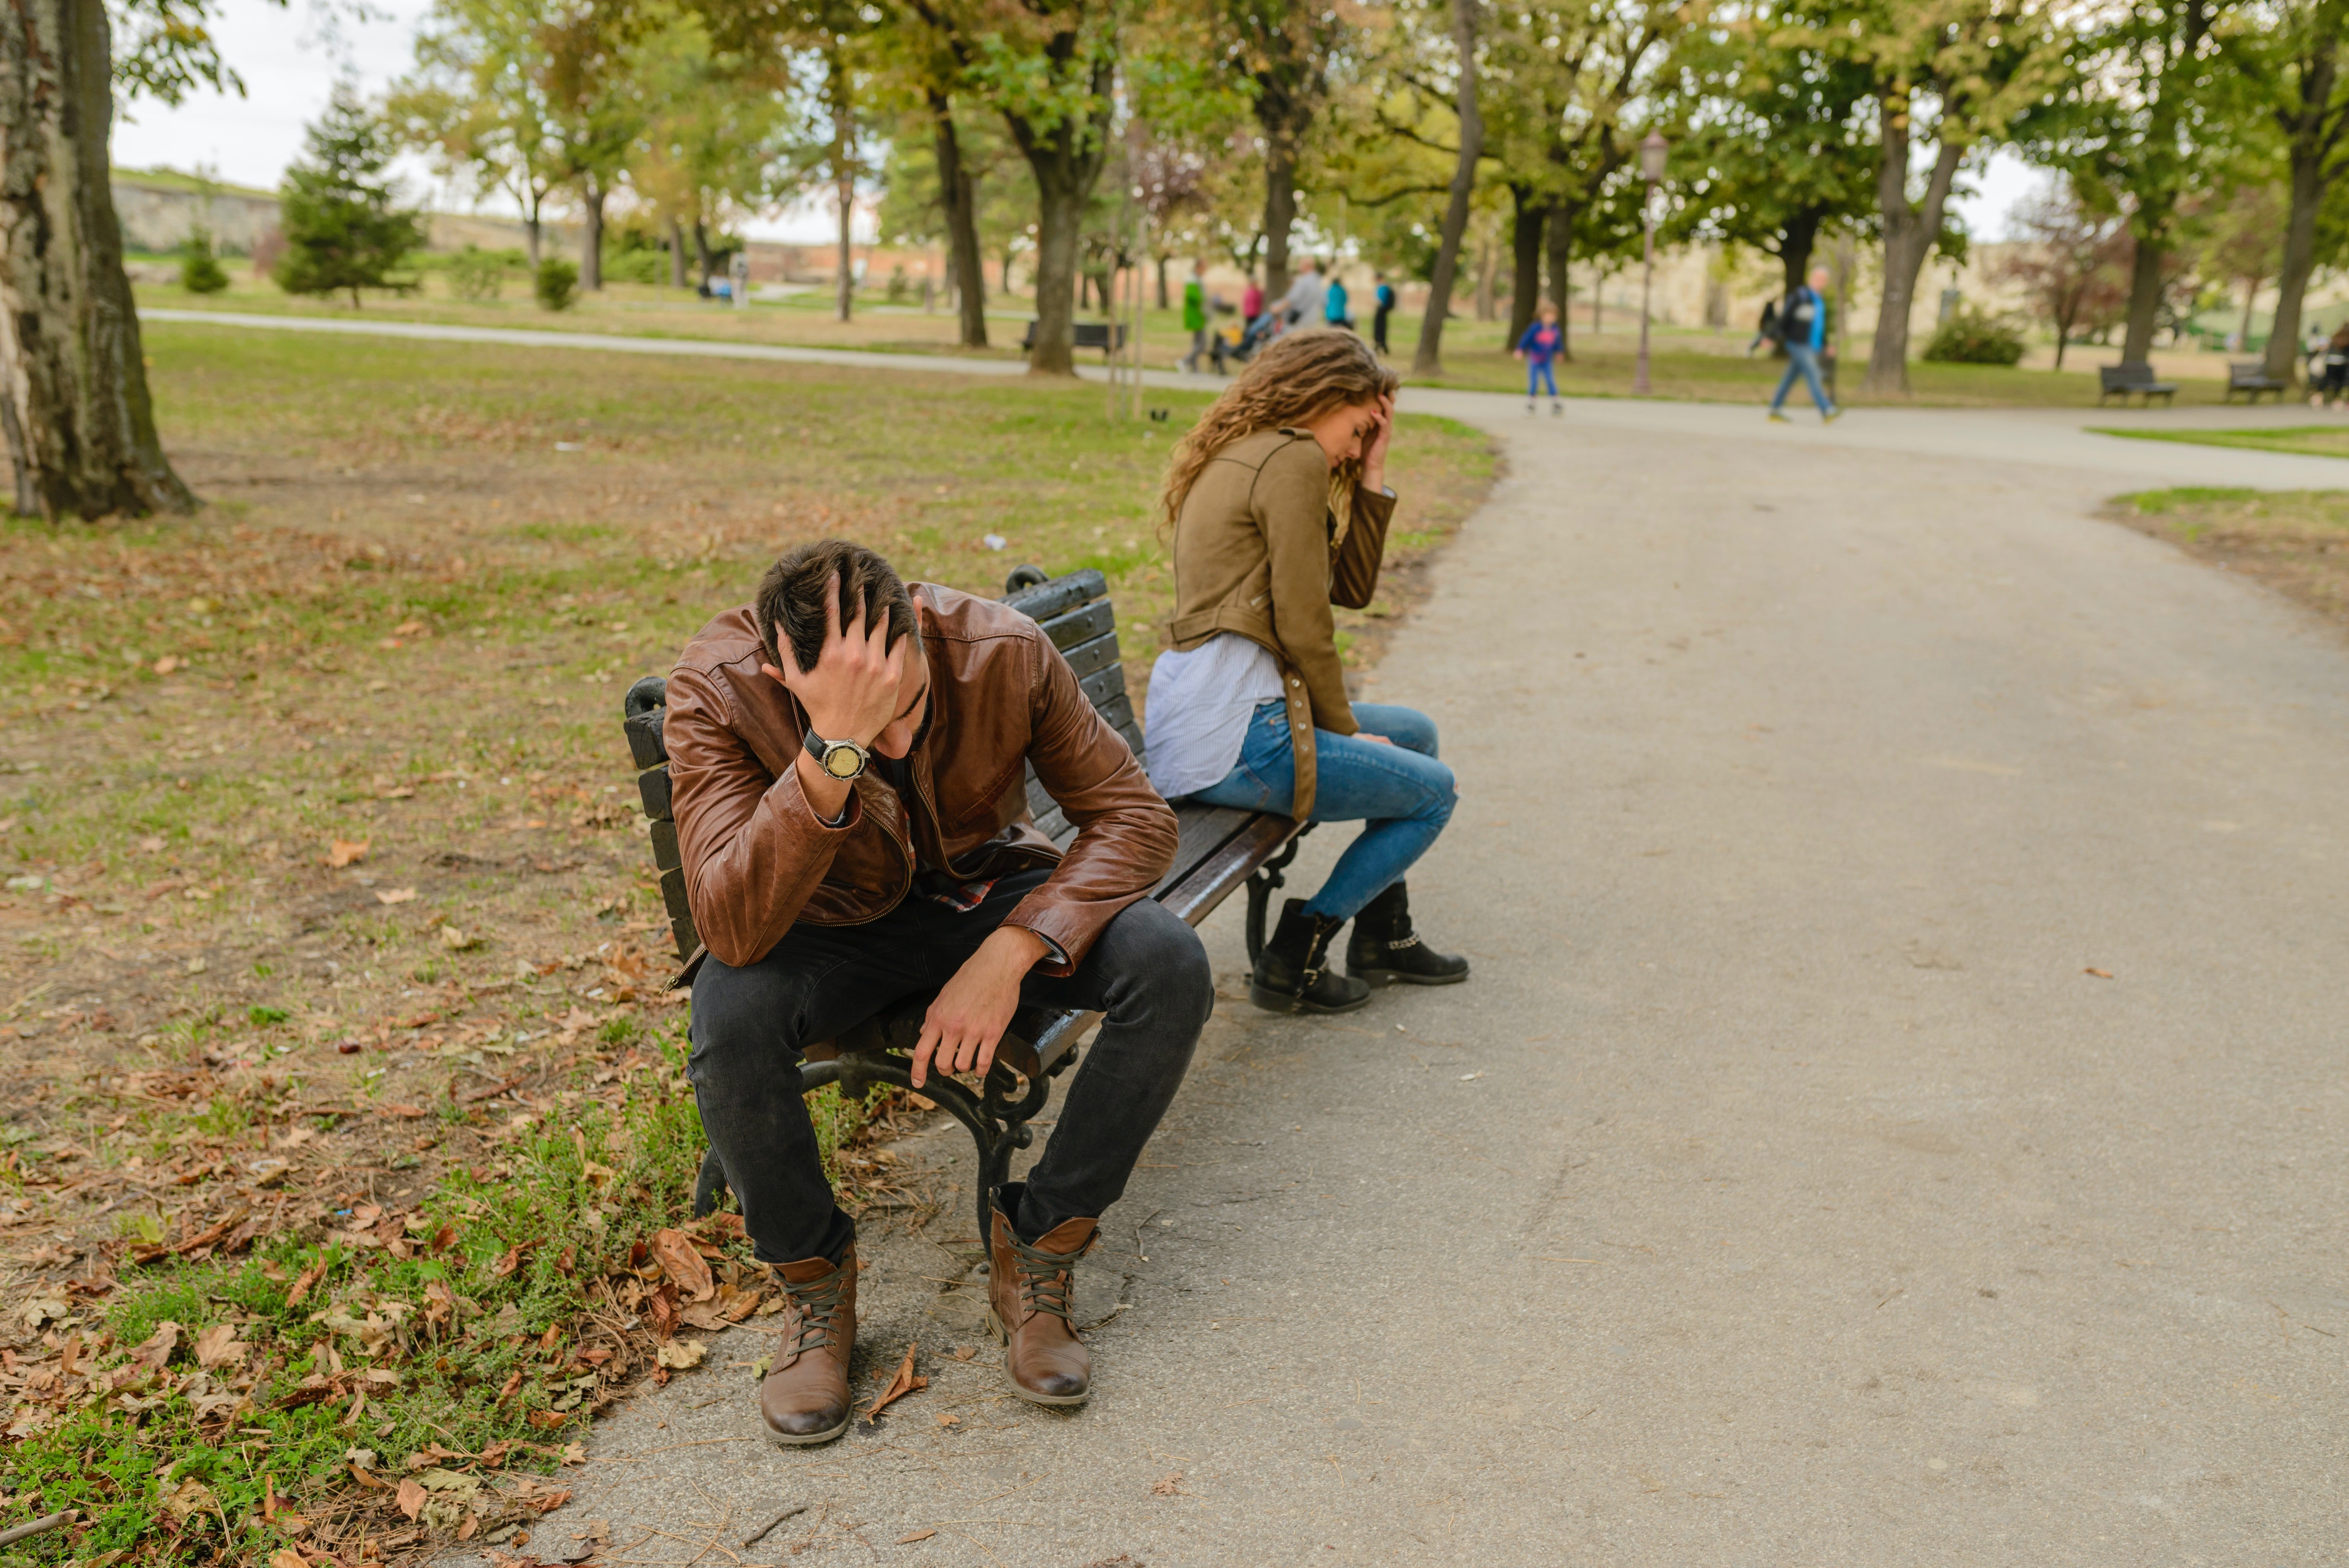 Upset and exhausted over a heated argument, couple sit apart on a bench | Photo: Pexels/vera-arsic